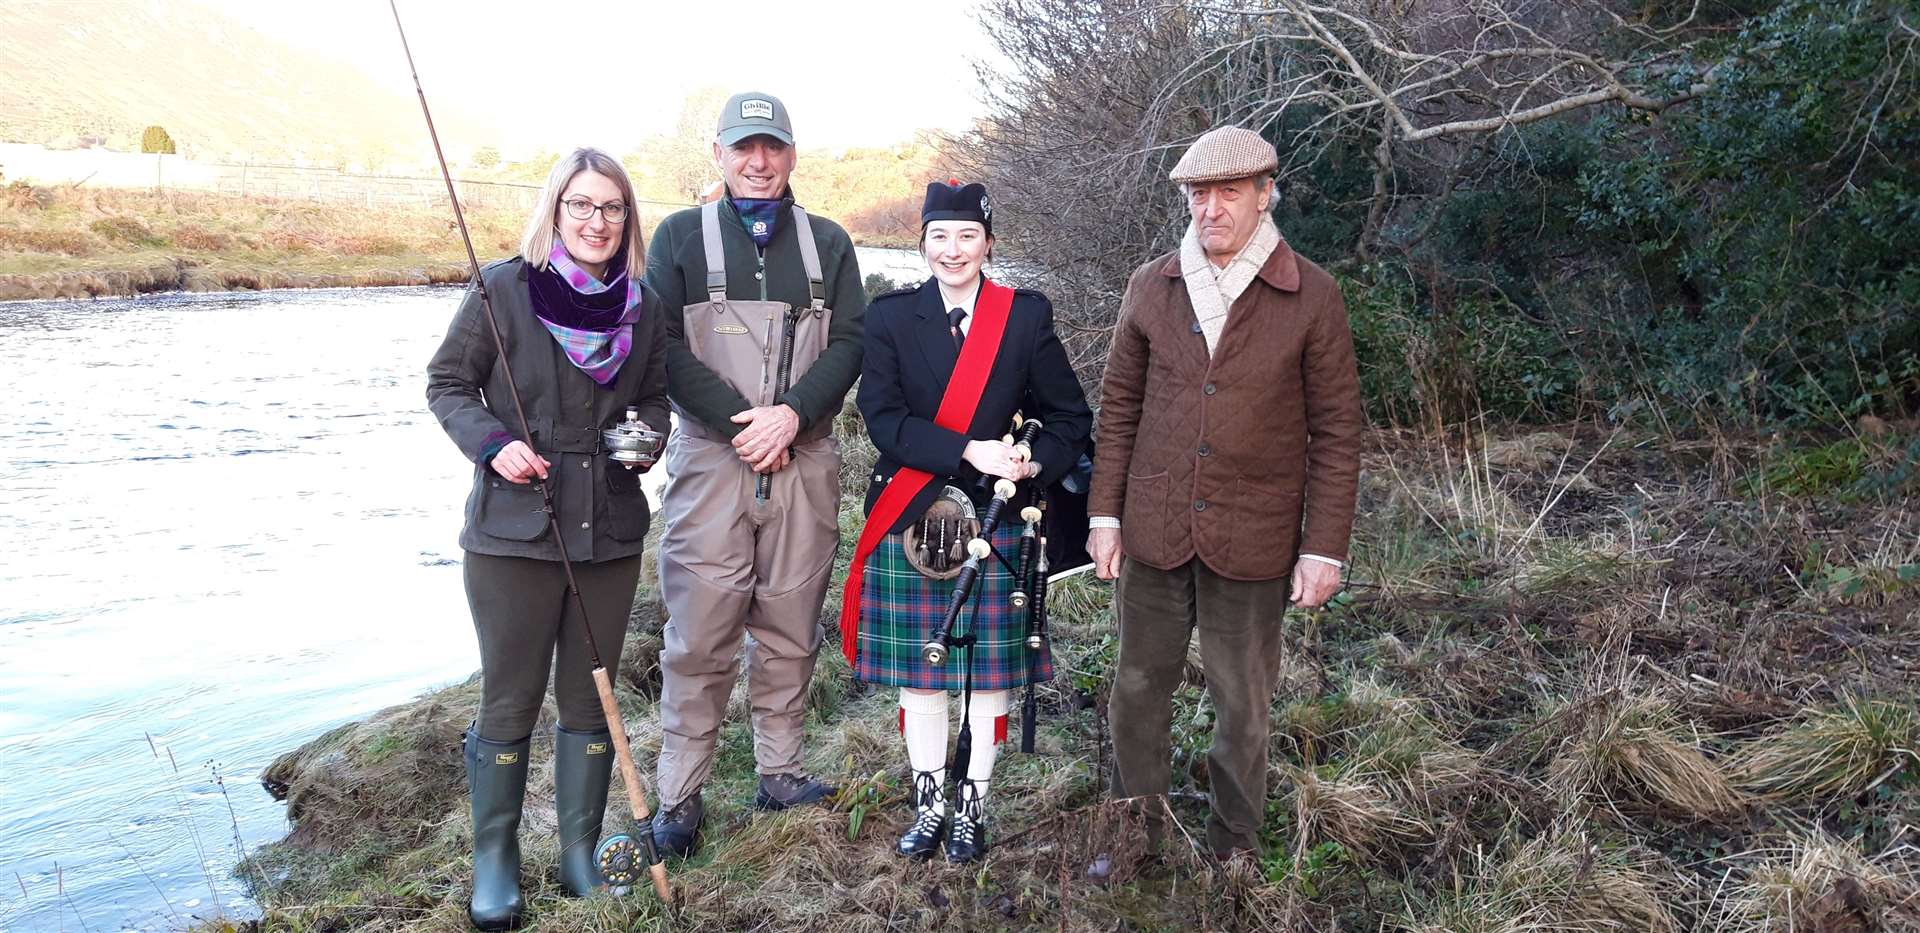 Yvonne Grant at the riverbank with her dad and ghillie Andy Sutherland (Torrish), piper April Sutherland and Michael Wigan.